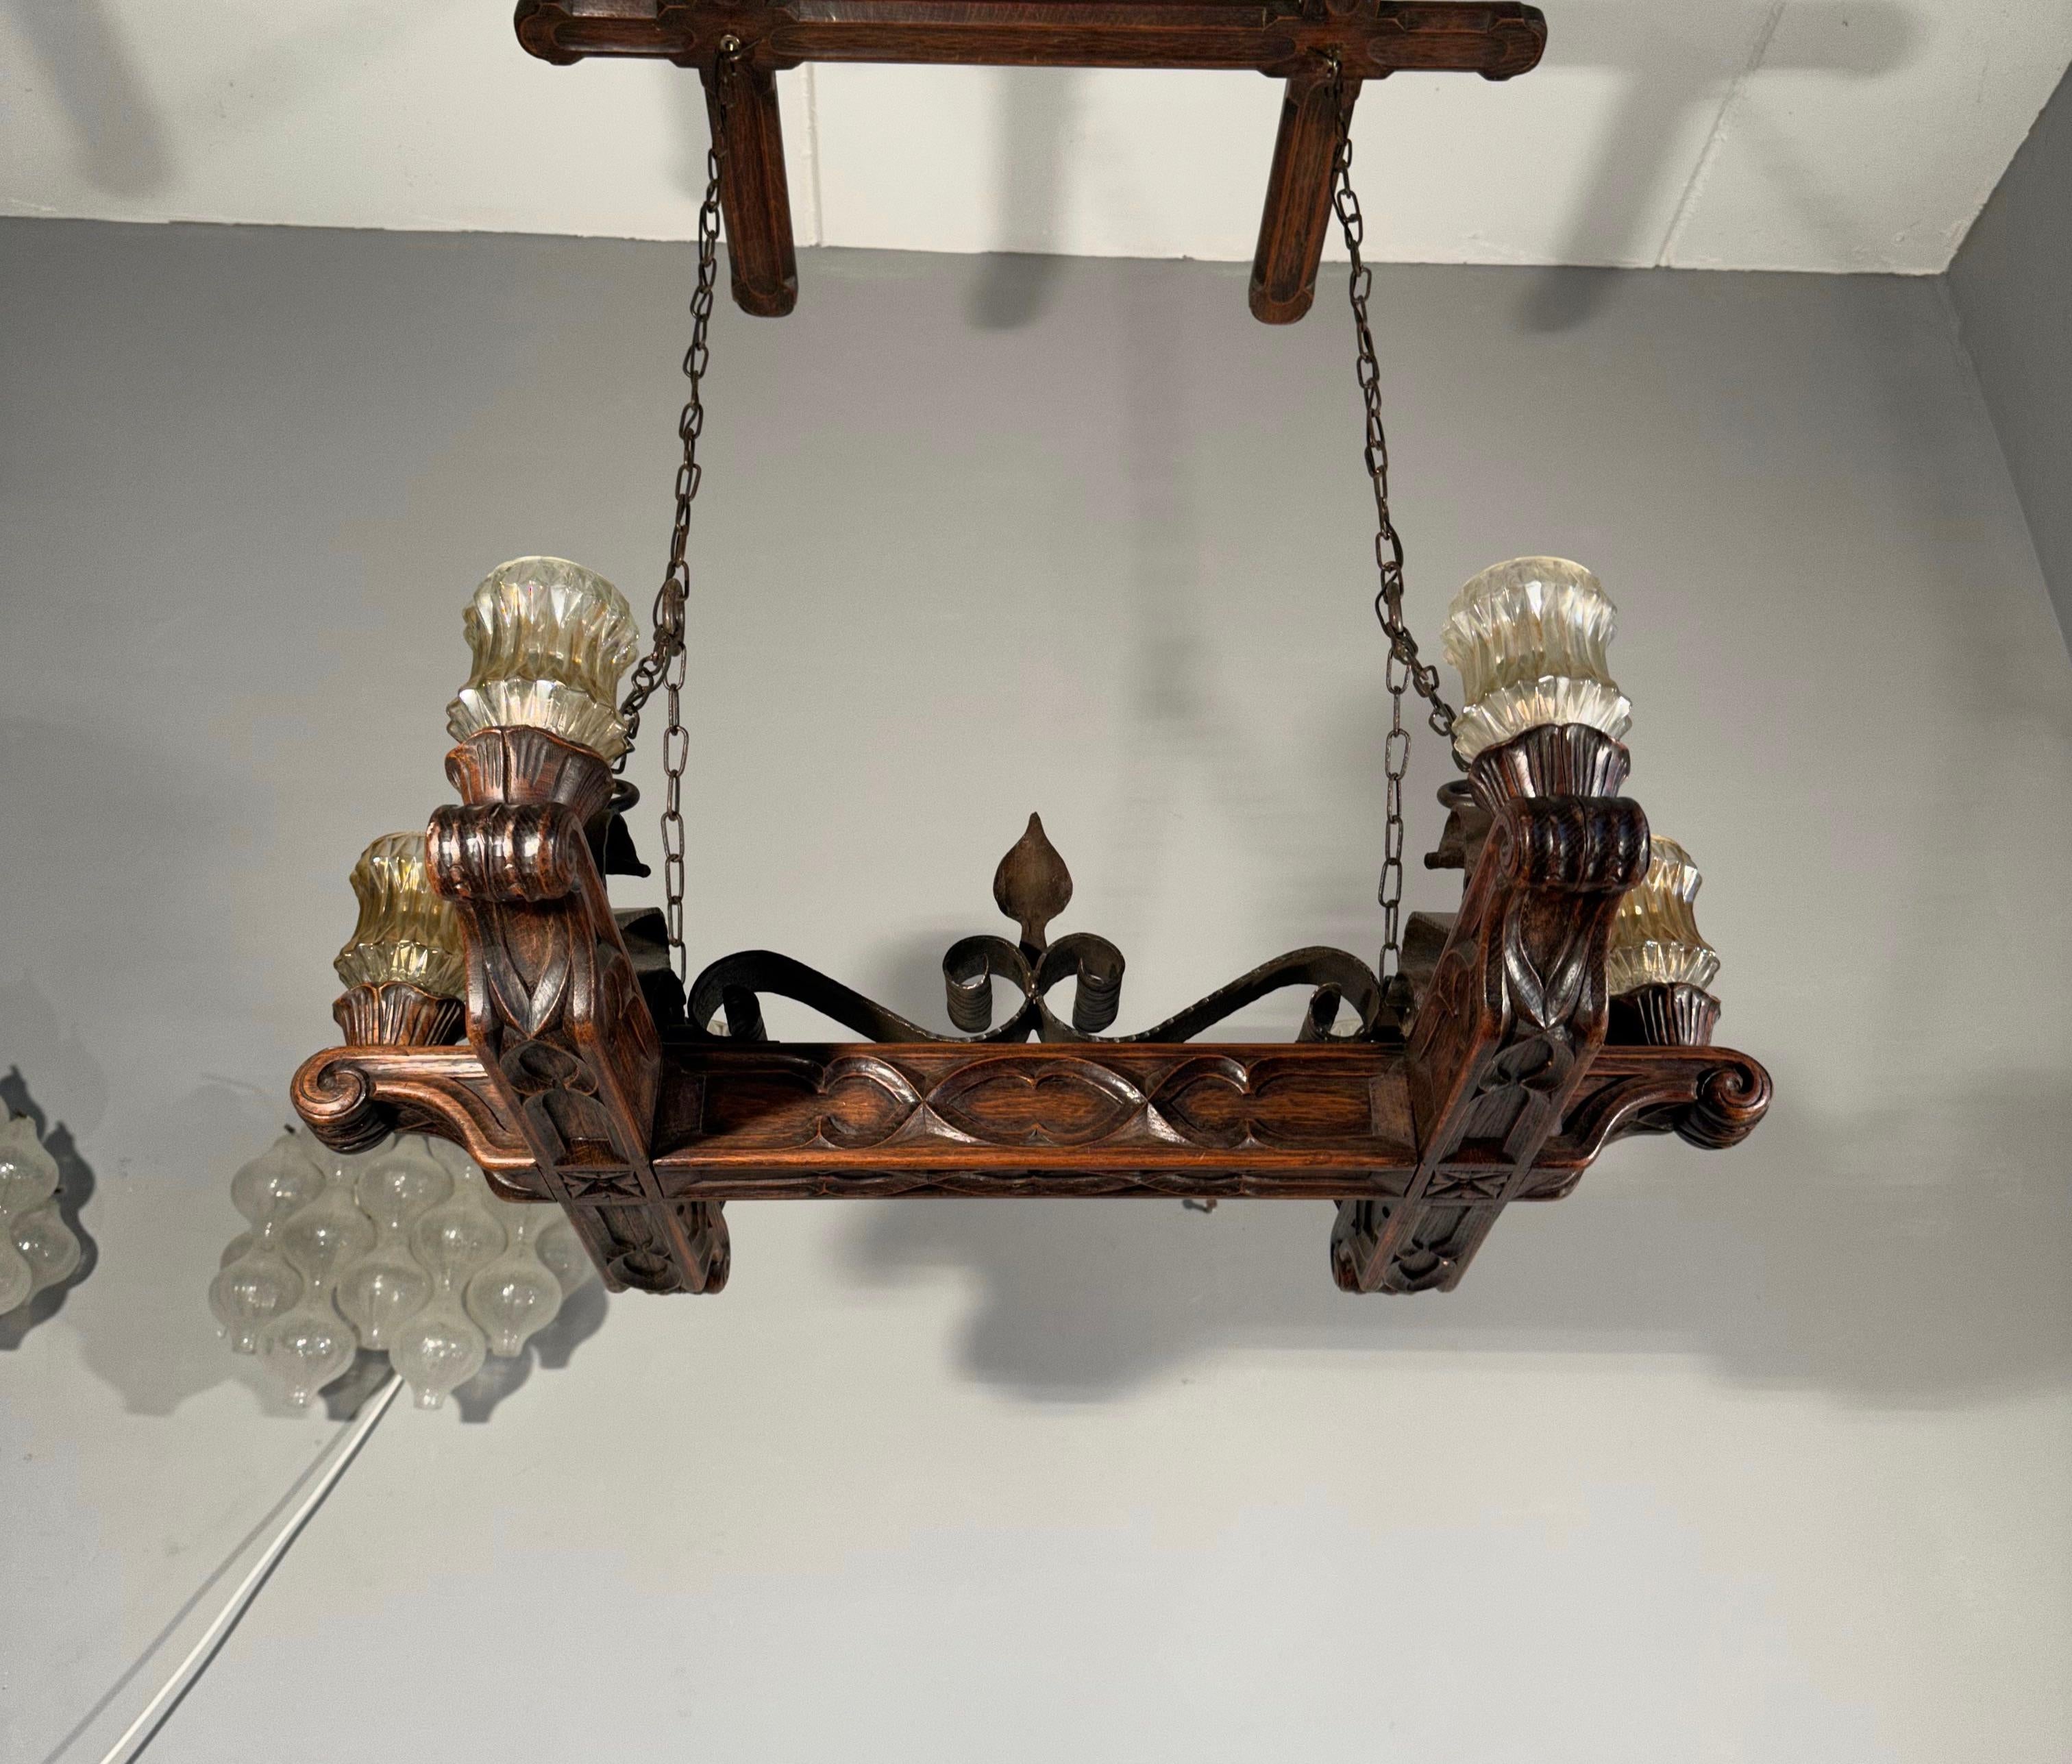 Rare Handcrafted Oak and Iron Gothic Revival Church Pendant Light / Chandelier For Sale 5